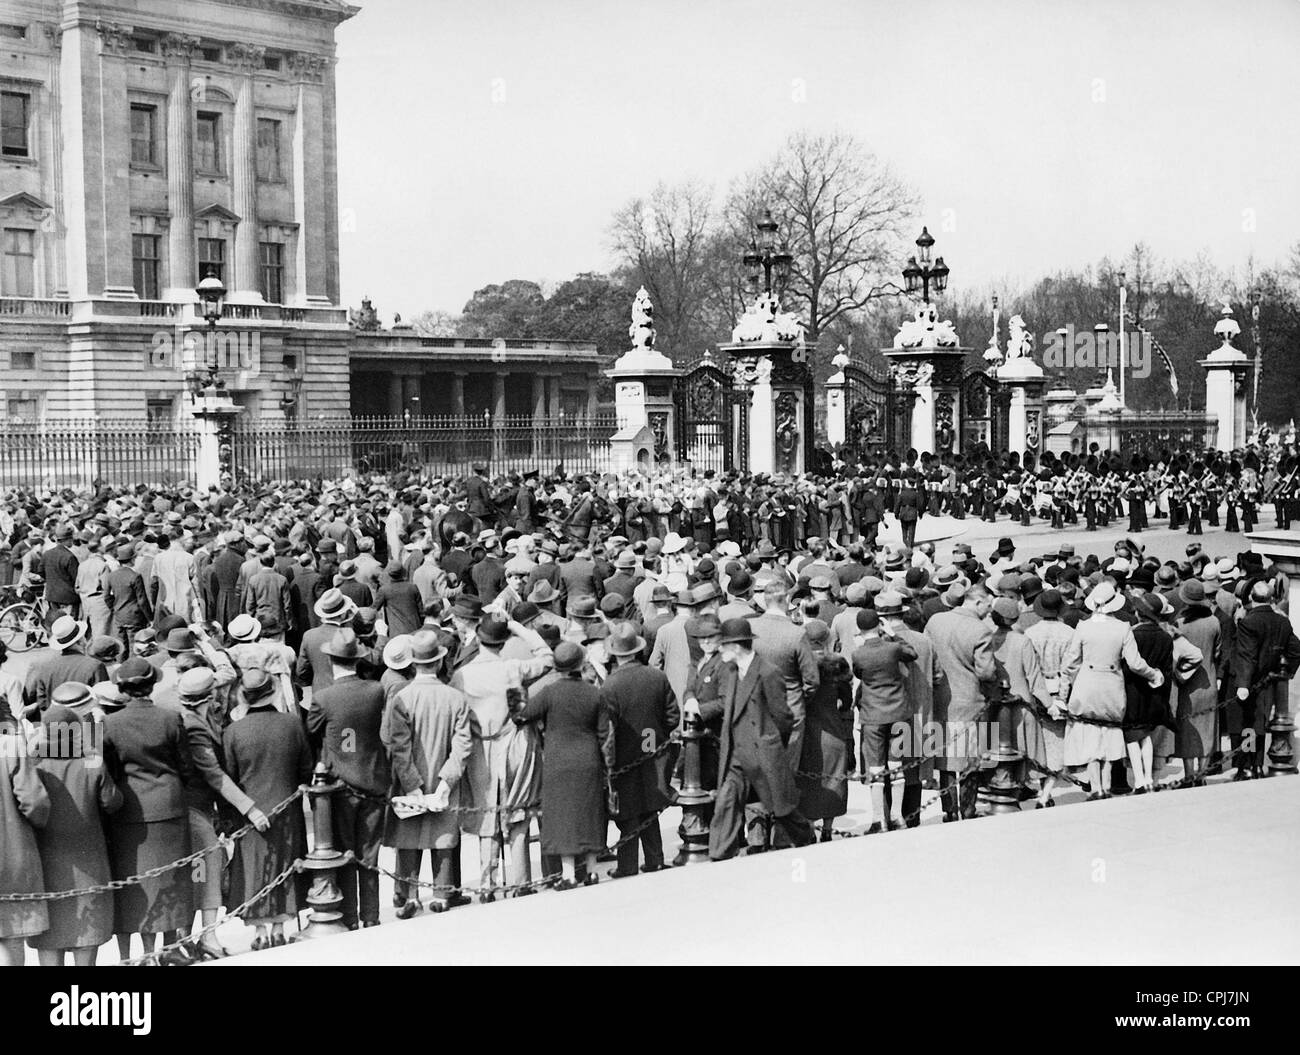 Crowd outside Buckingham Palace on the occasion of the Silver Jubilee of the King, 1935 Stock Photo